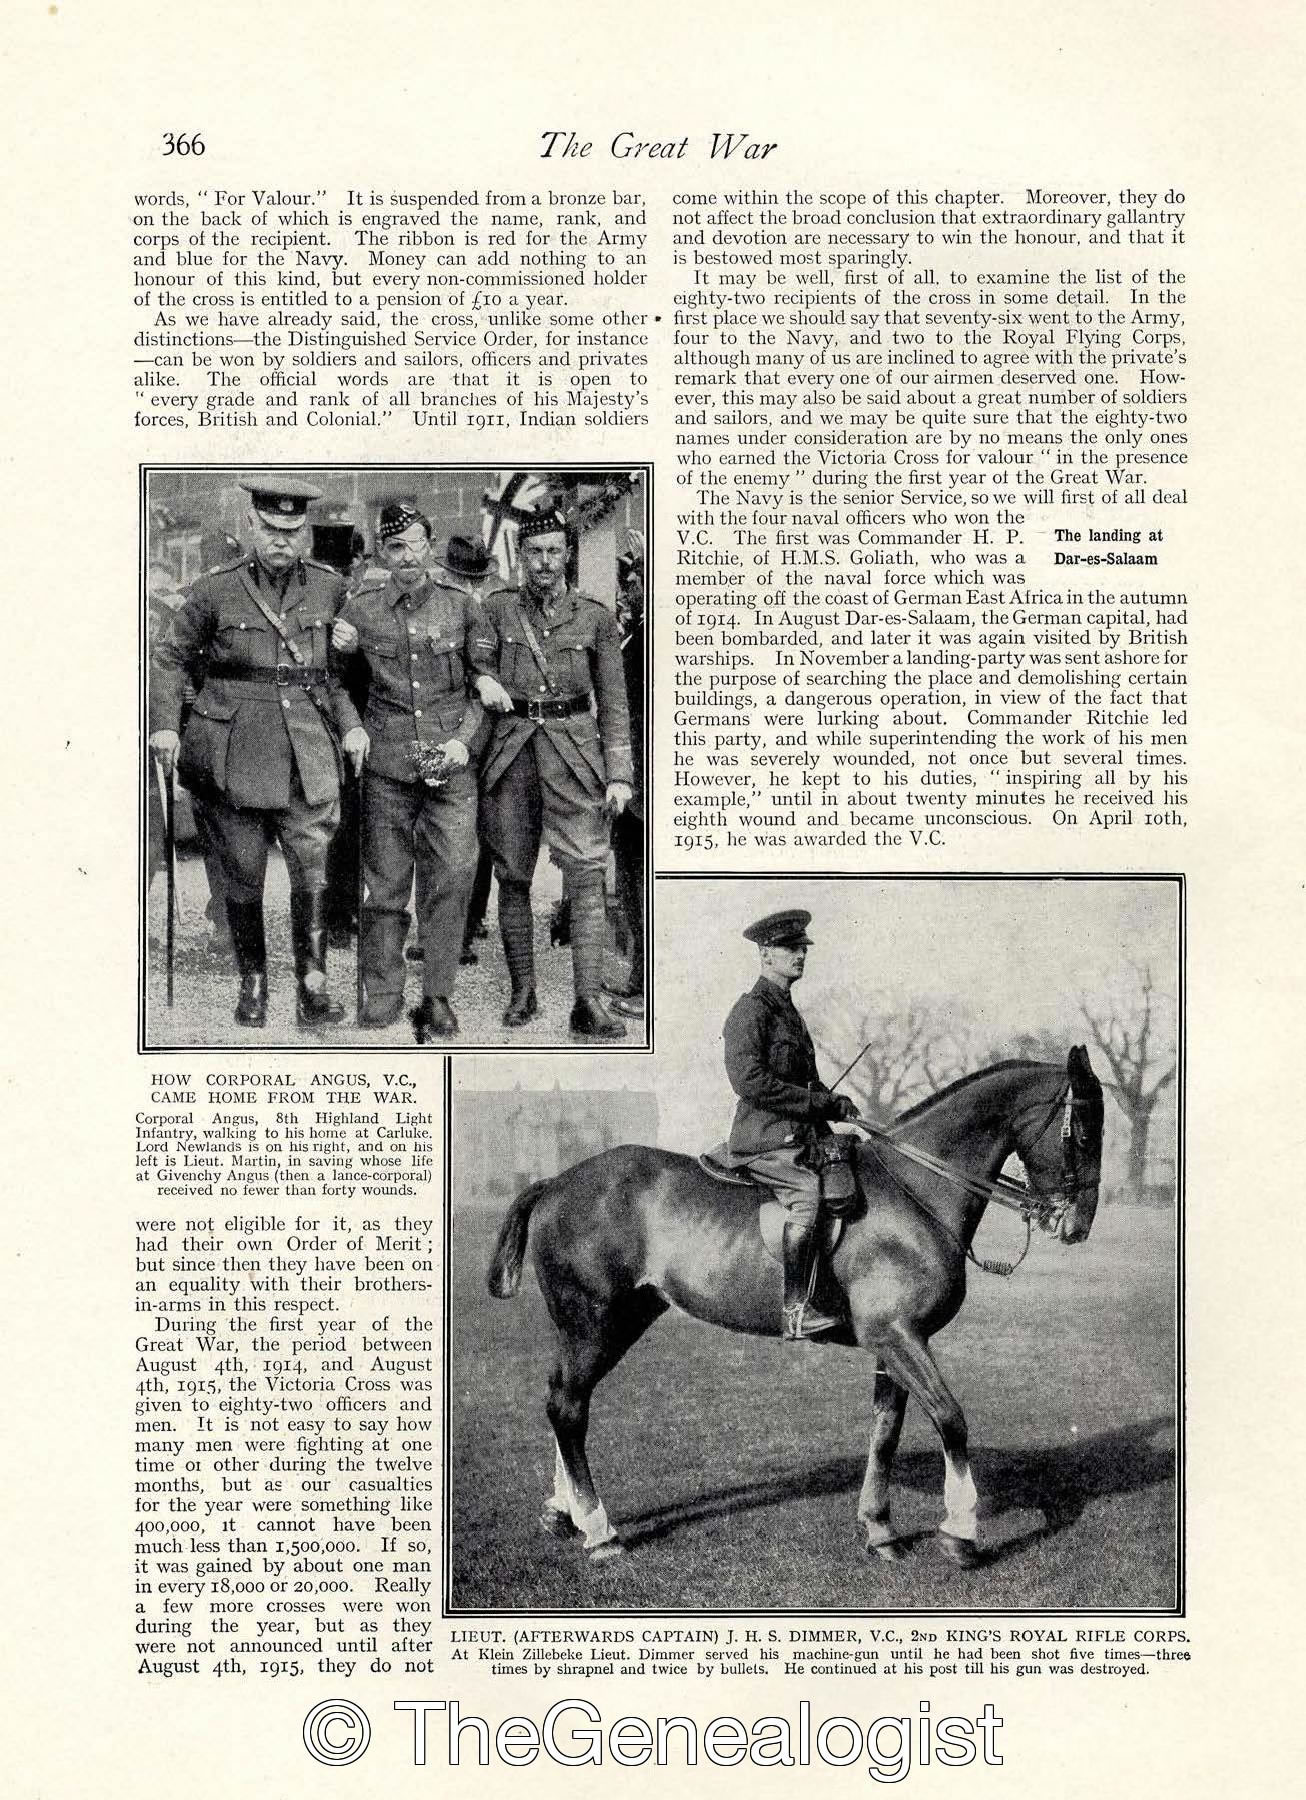 The Great War in Newspapers and Magazines